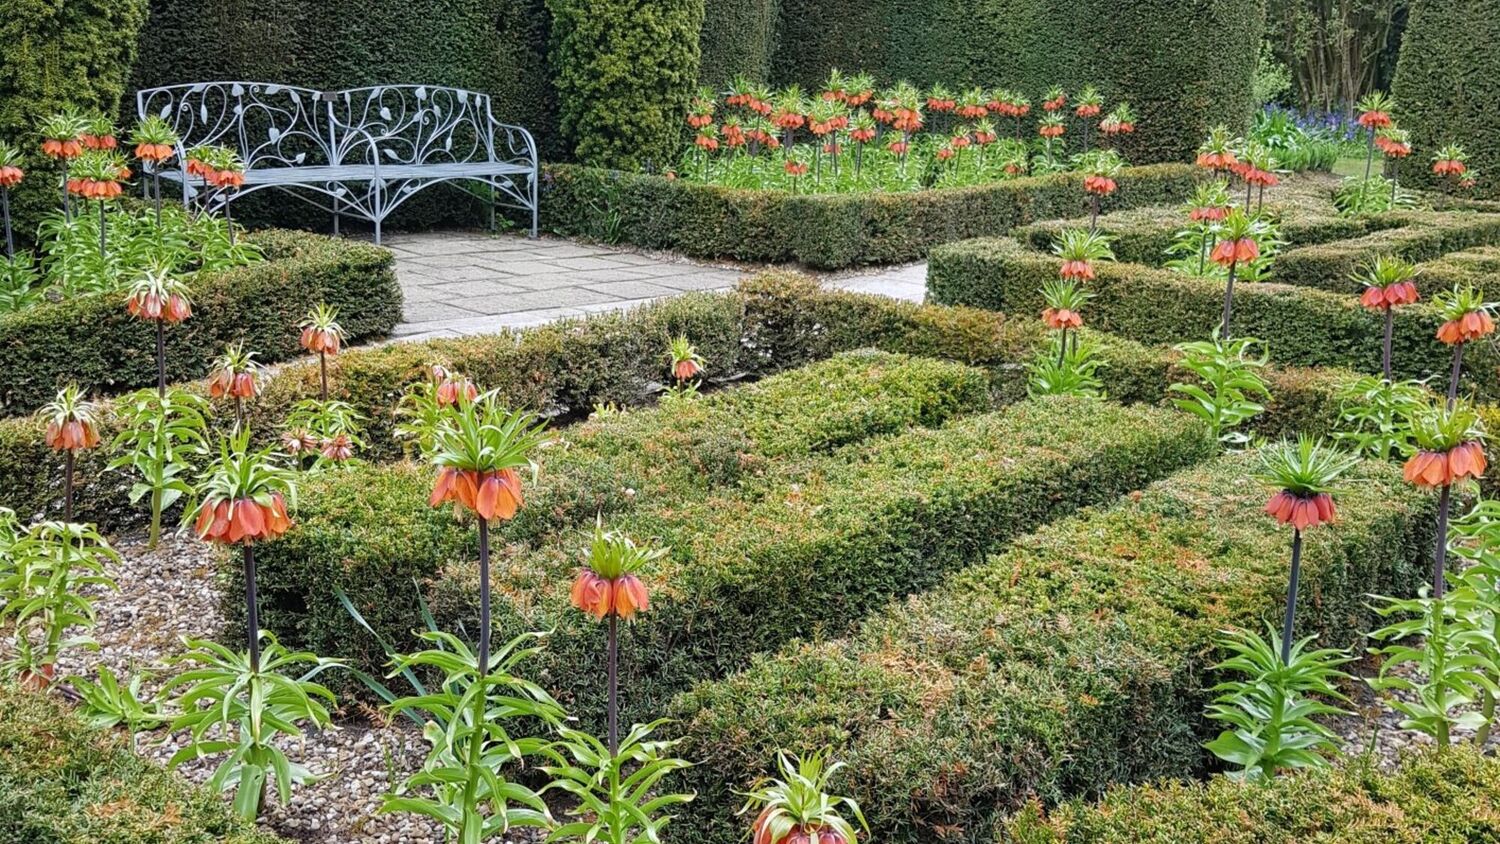 A parterre garden with low hedging and crown imperial fritillaries. There is an ornate metal bench in the background.